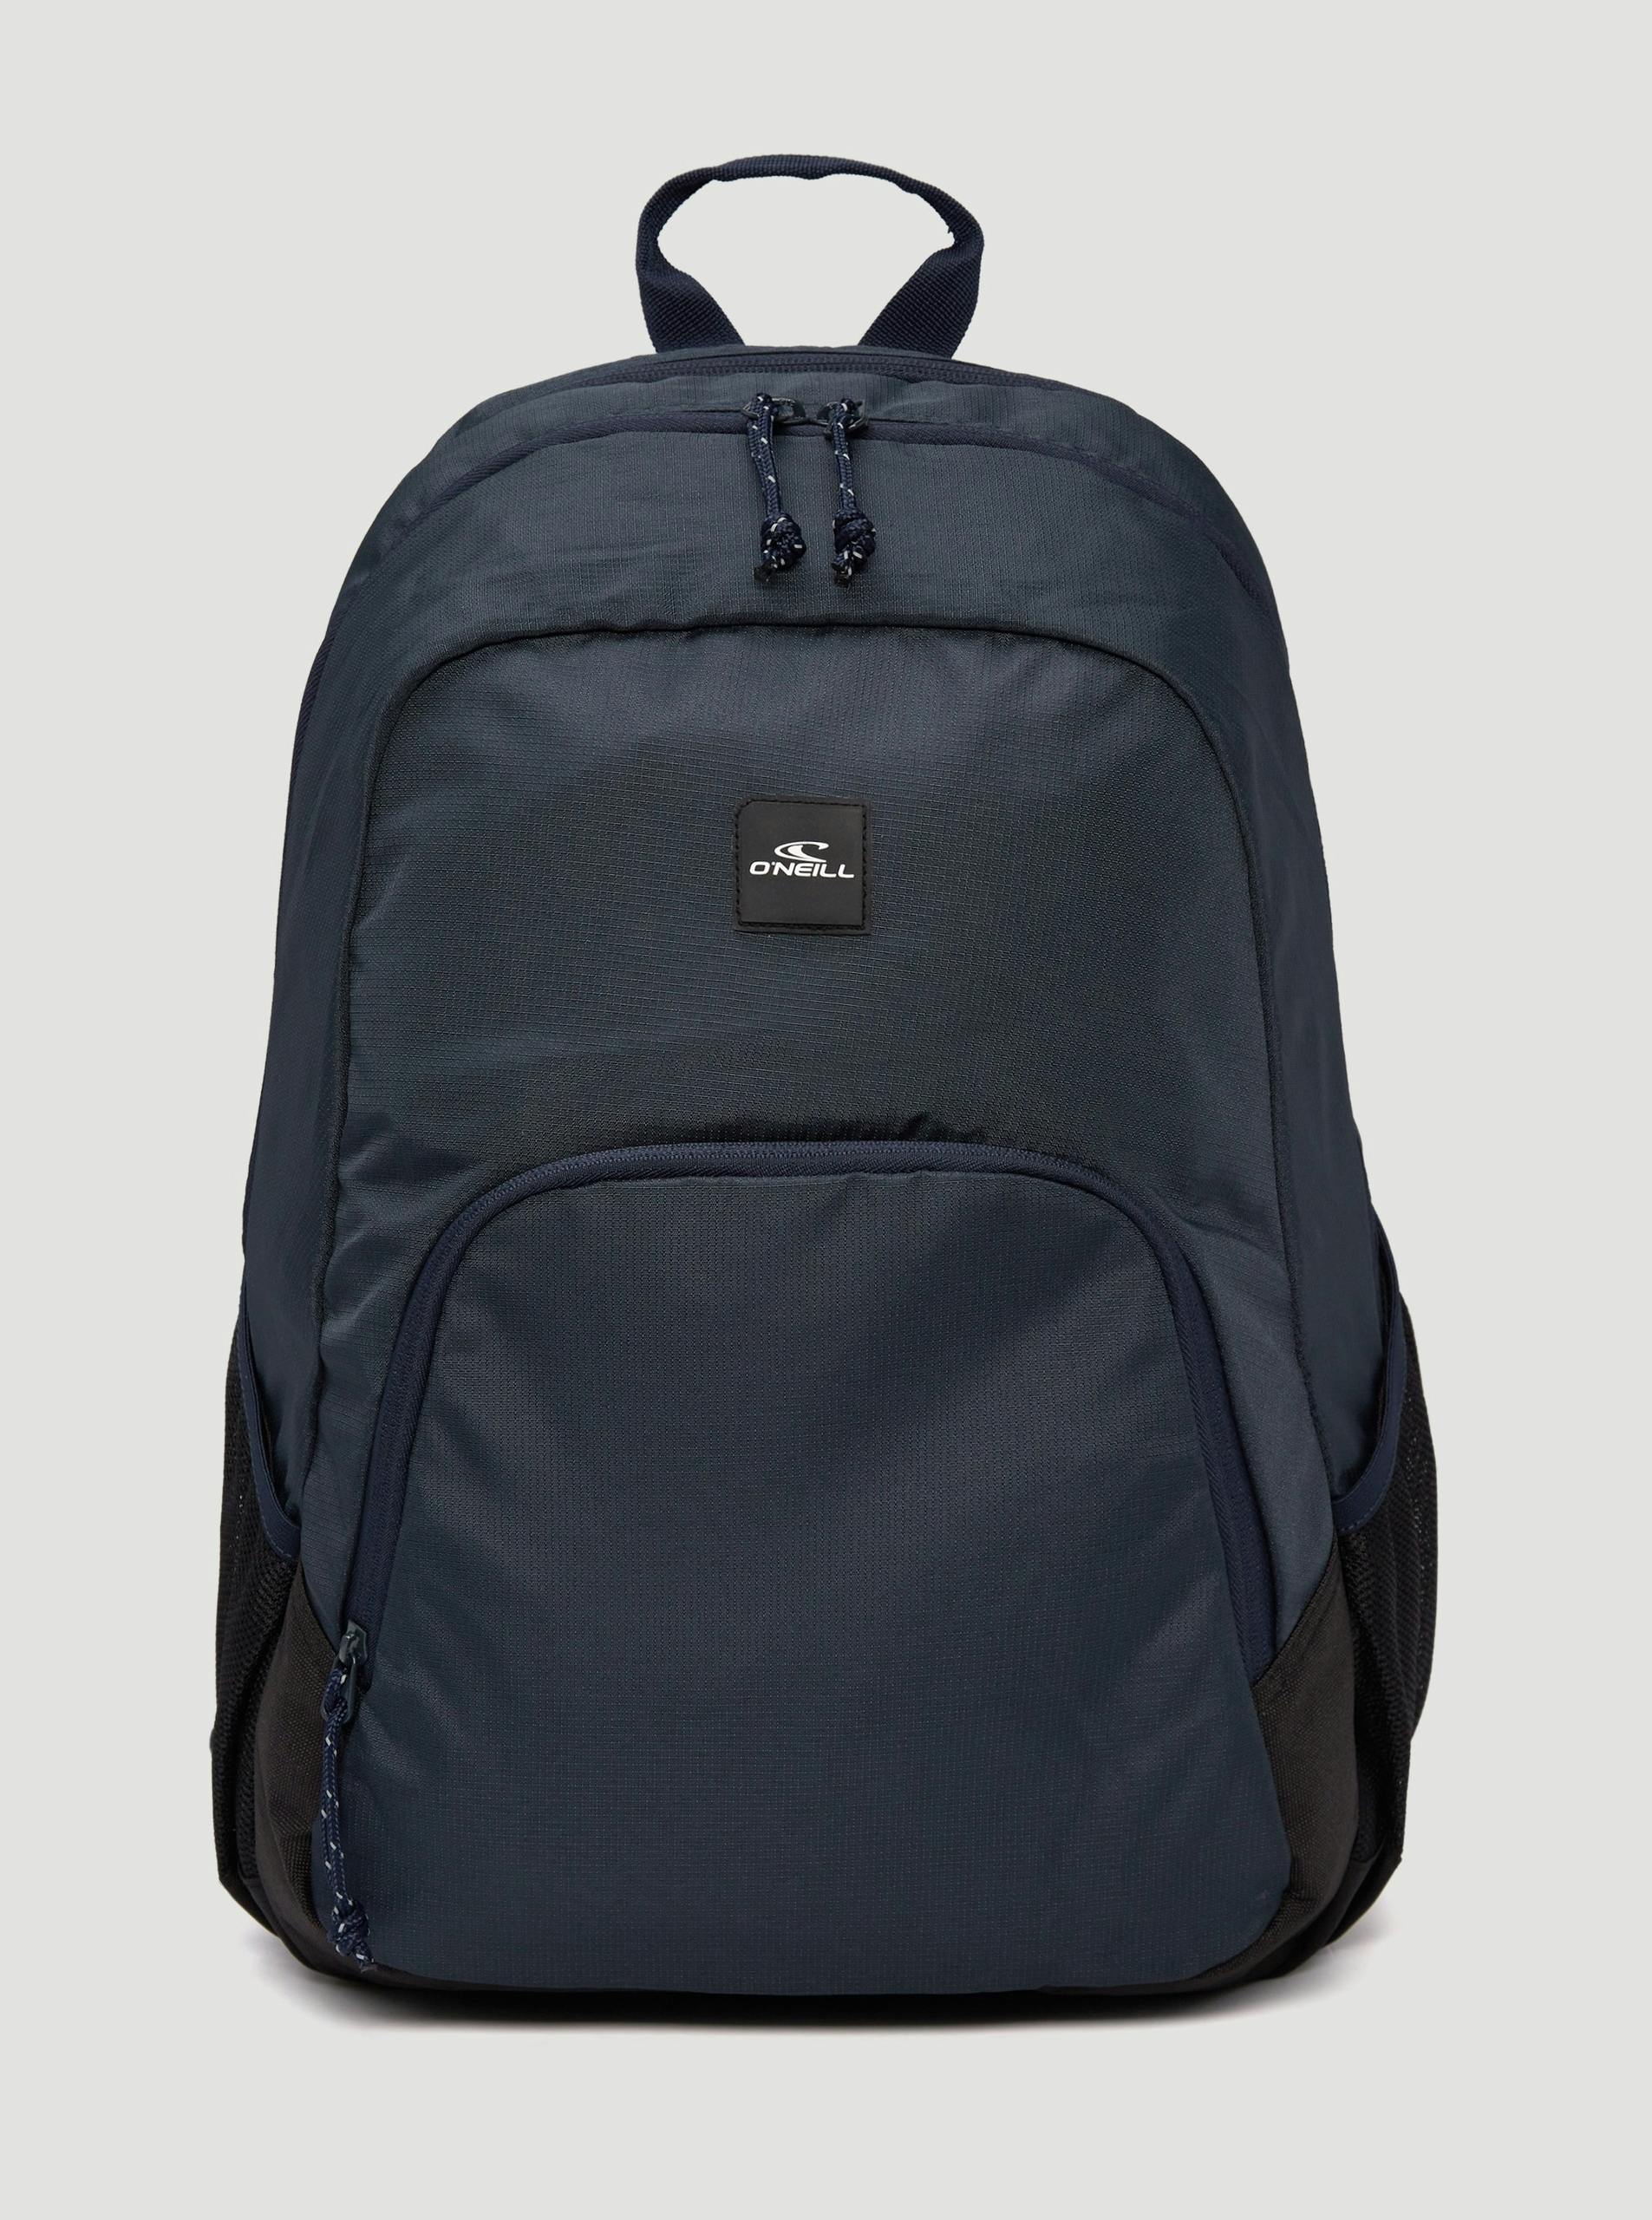 O'neill Sac à Dos Wedge Backpack Outer Space